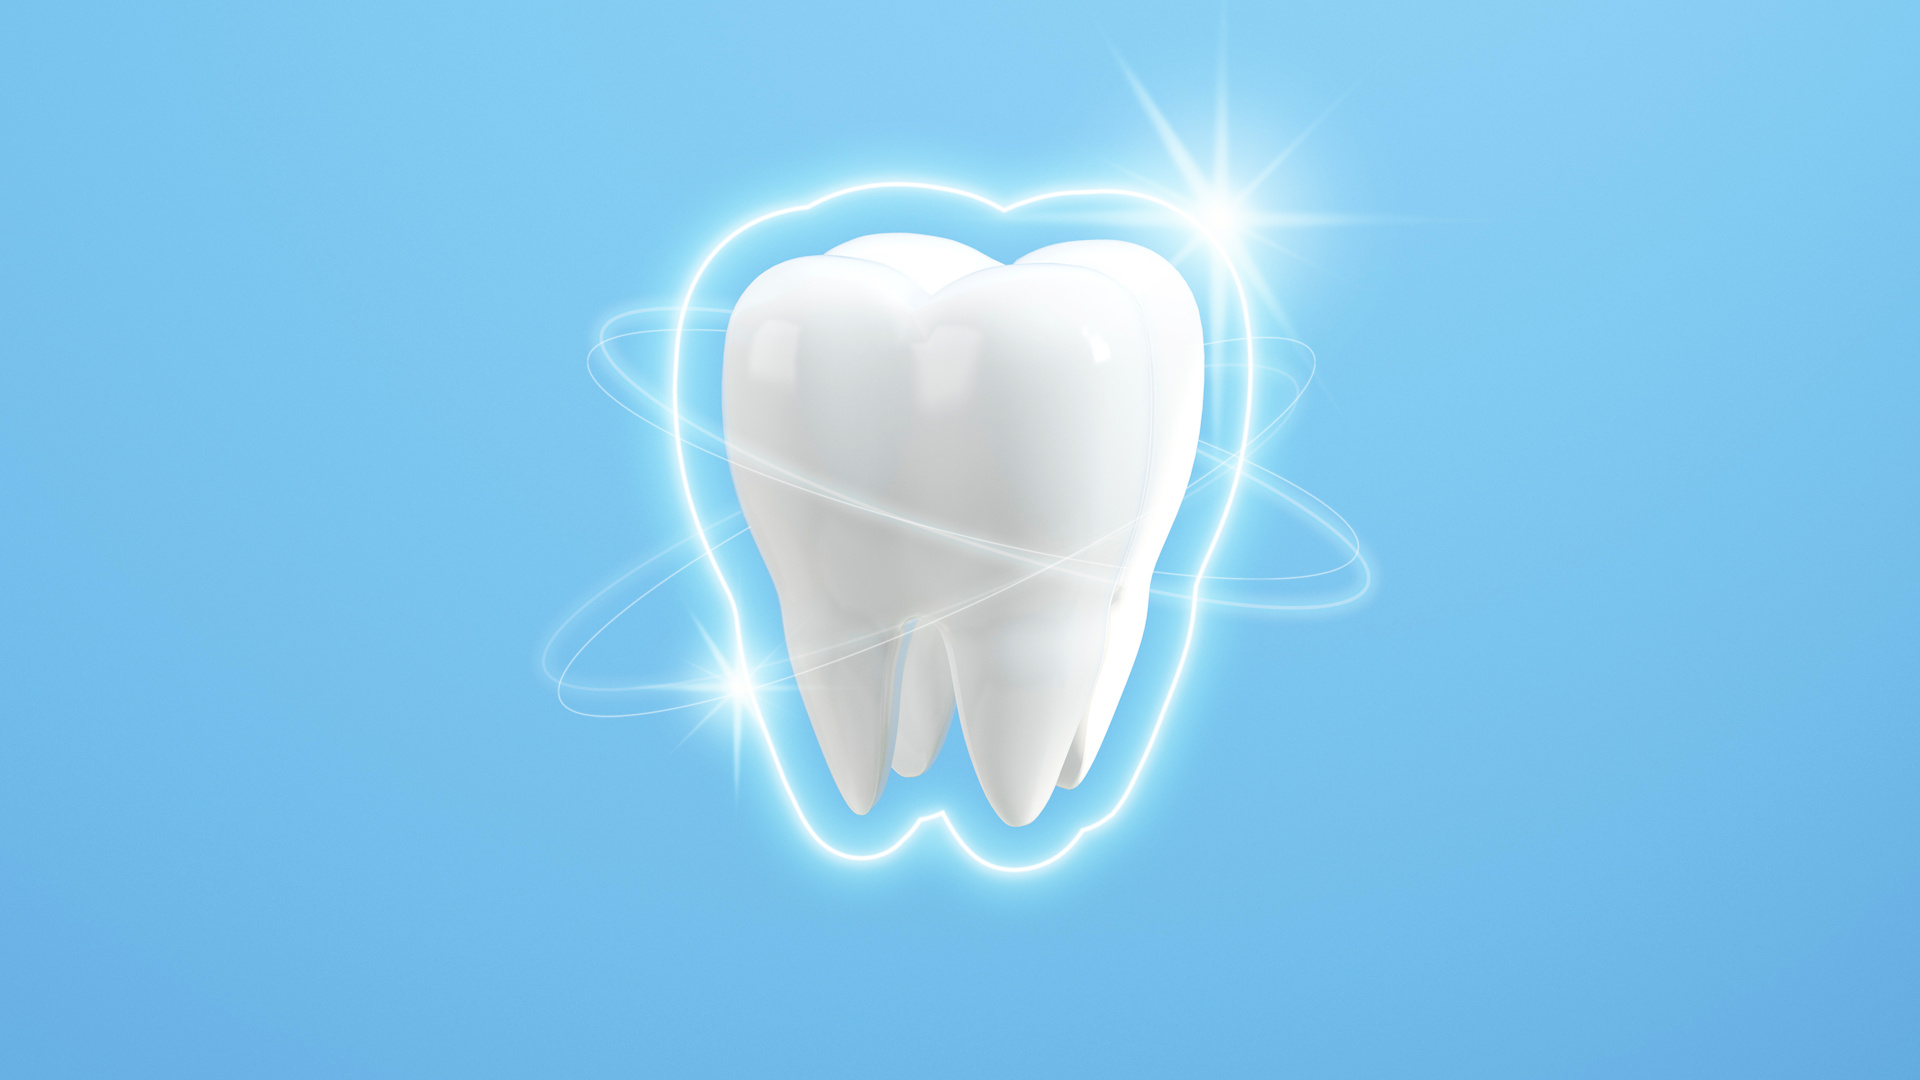 Dental care. protected teeth glowing brightly on a blue background. 3d rendering